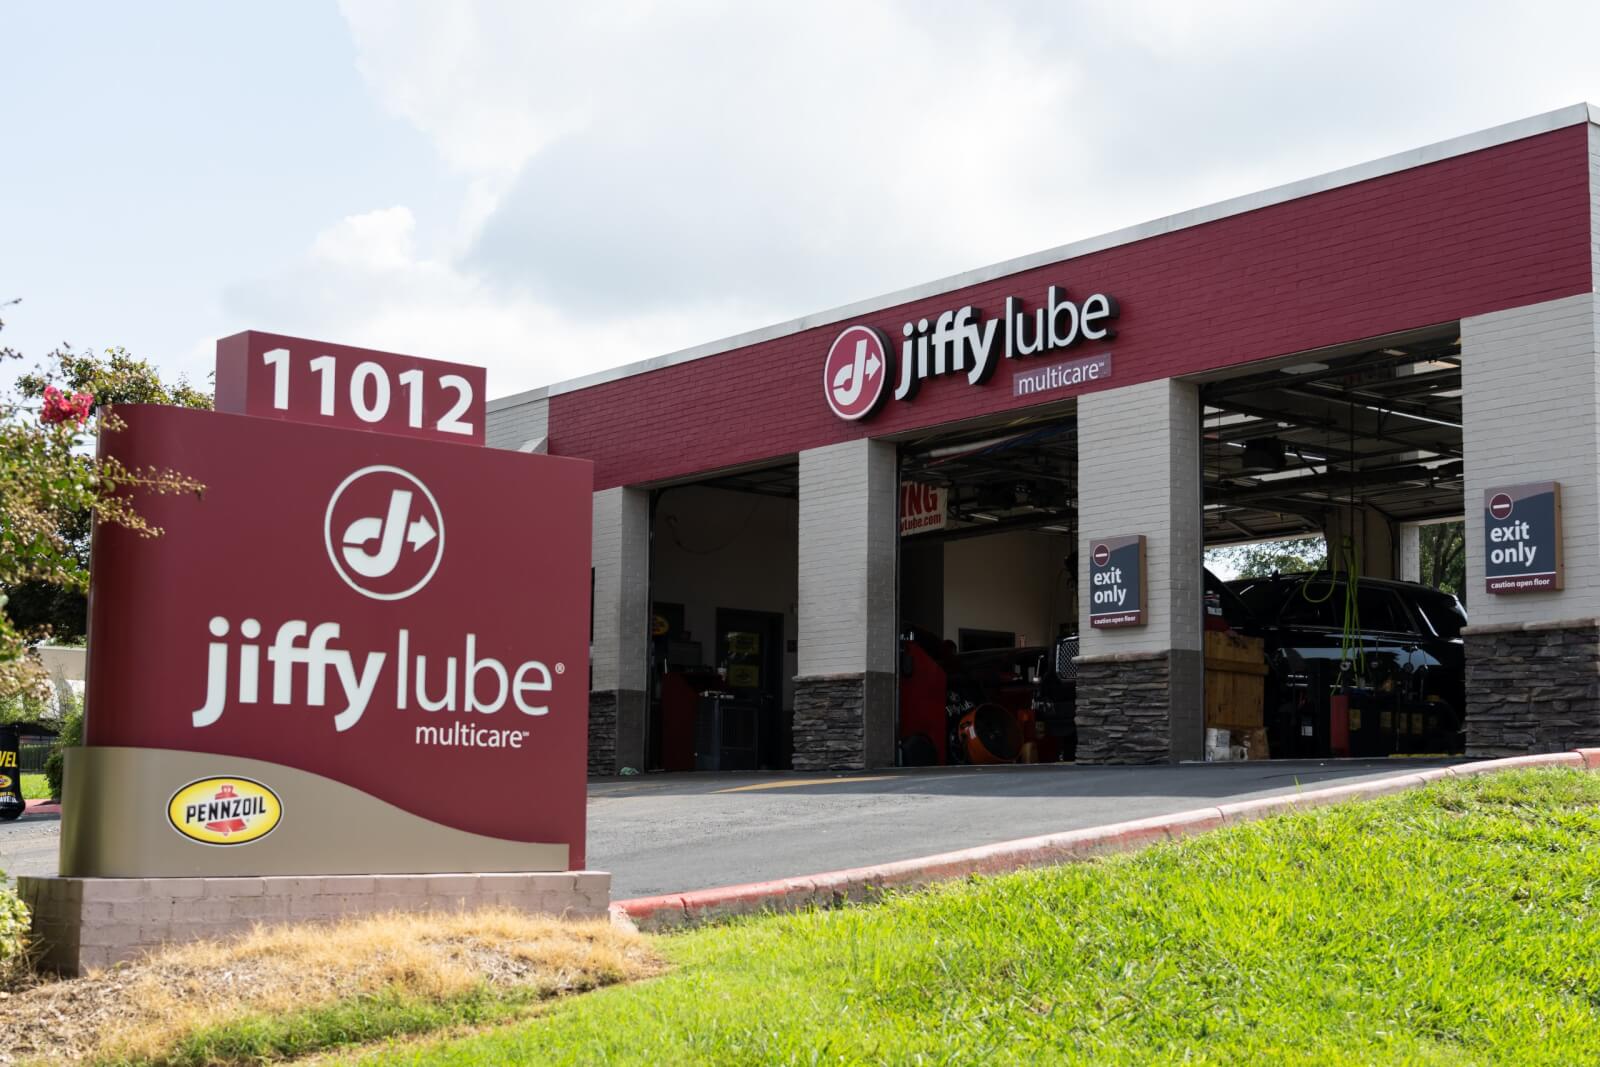 get-40-off-jiffy-lube-coupons-codes-printable-coupon-march-2023